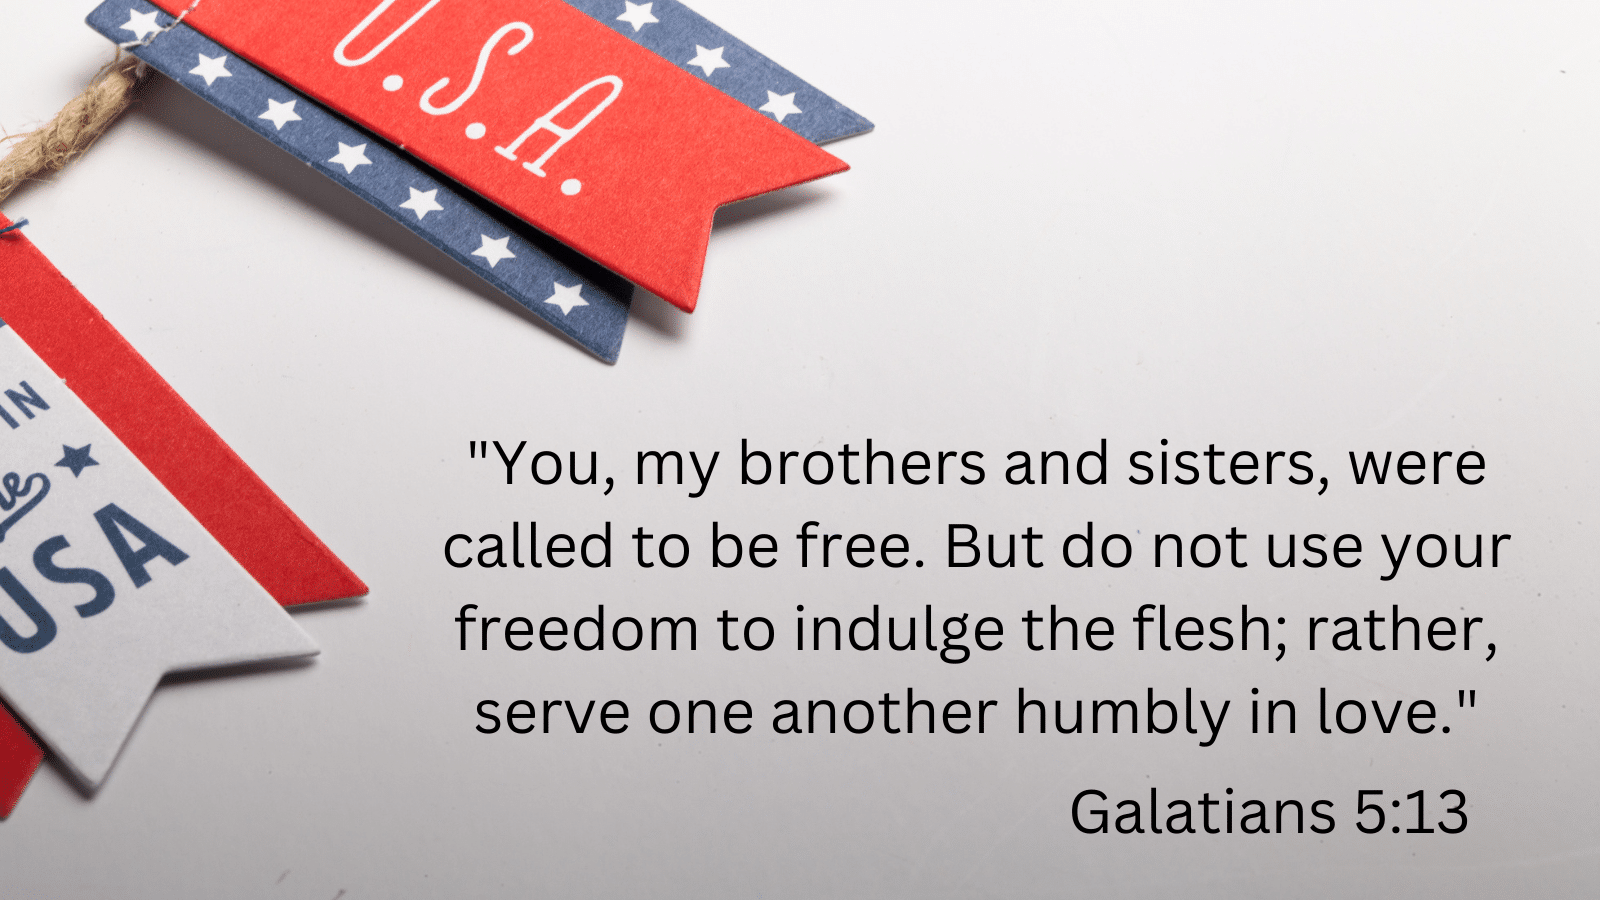 USA banner with Galatians 5:13